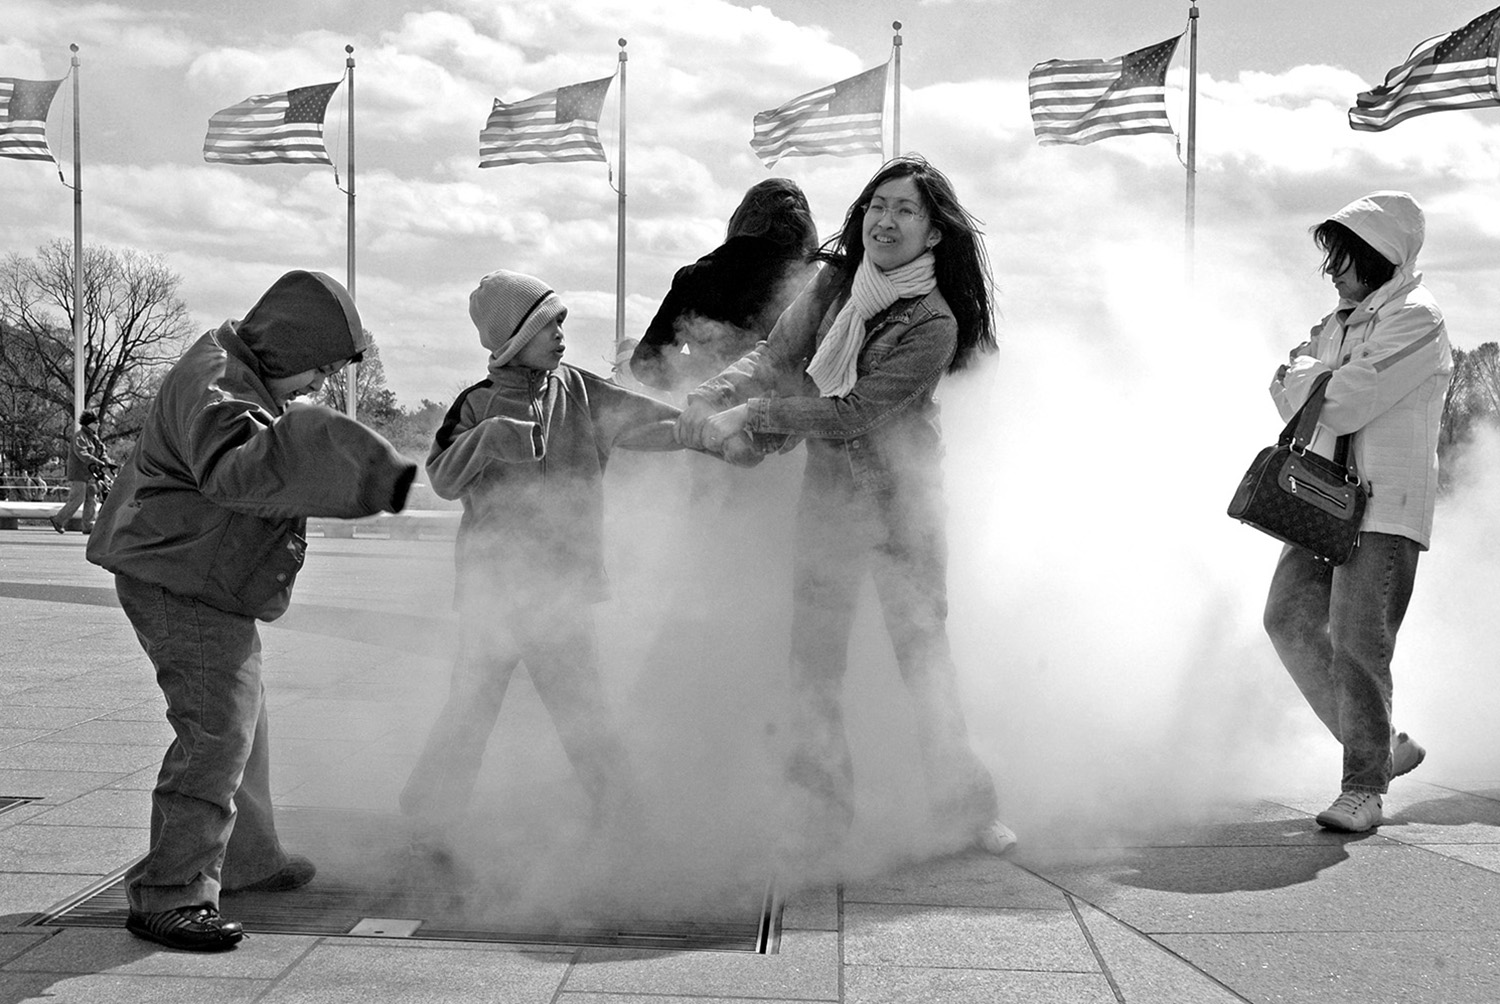 Tourists_Washington_Monument_Winter_Steam_Grate_Siblings_American_Flags.jpg